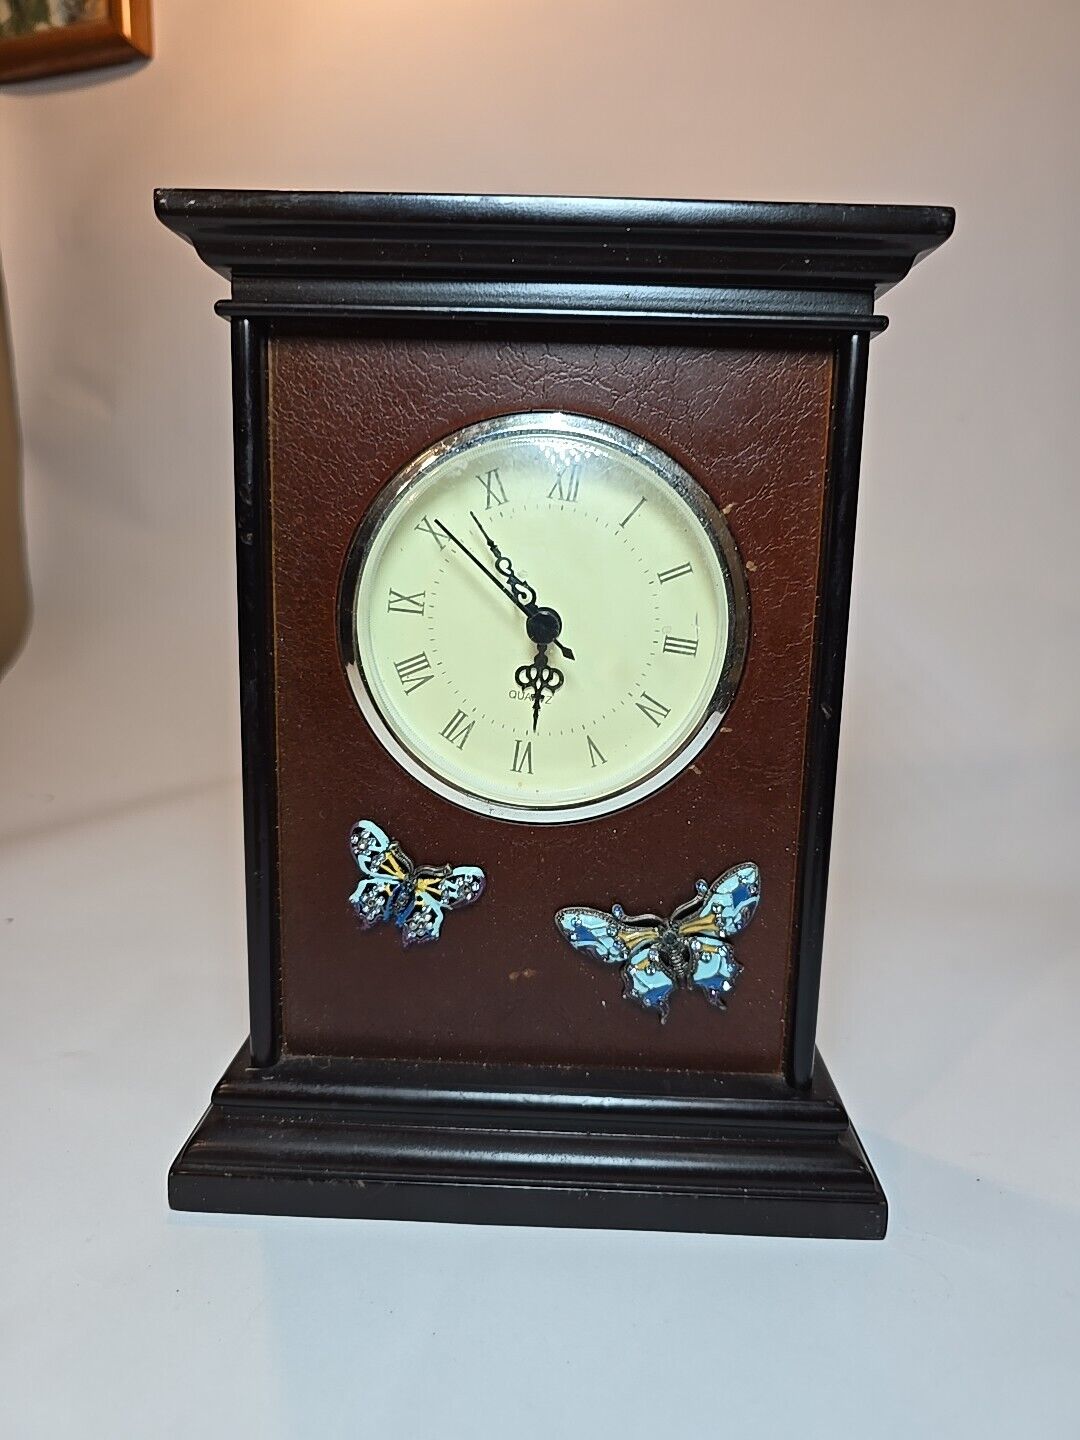 Wooden Quartz Mantel Clock Untested With Butterfly Accents